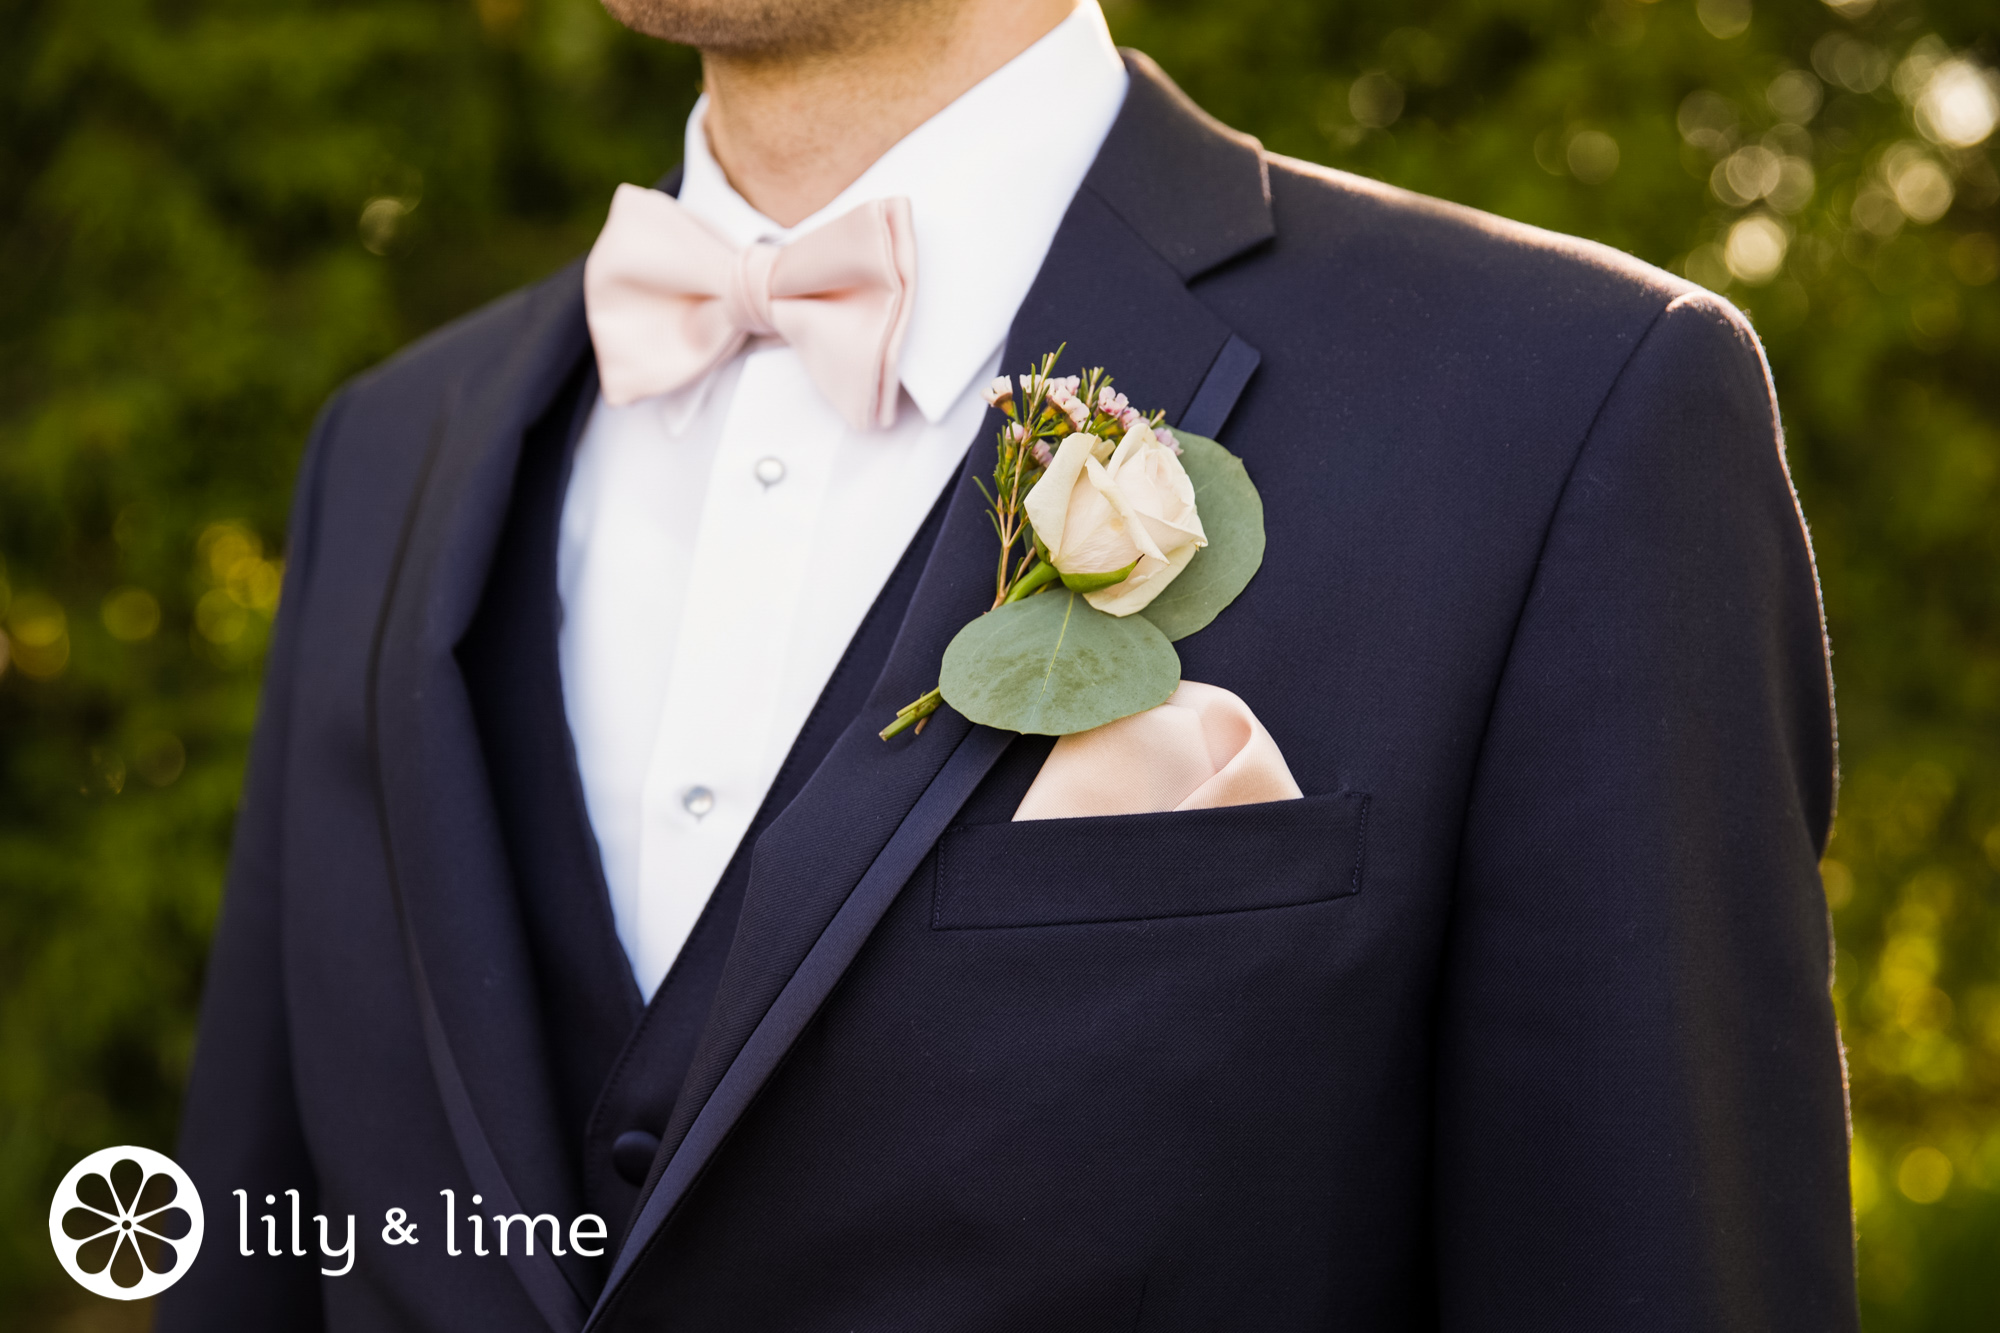 accessories for groom and groomsmen